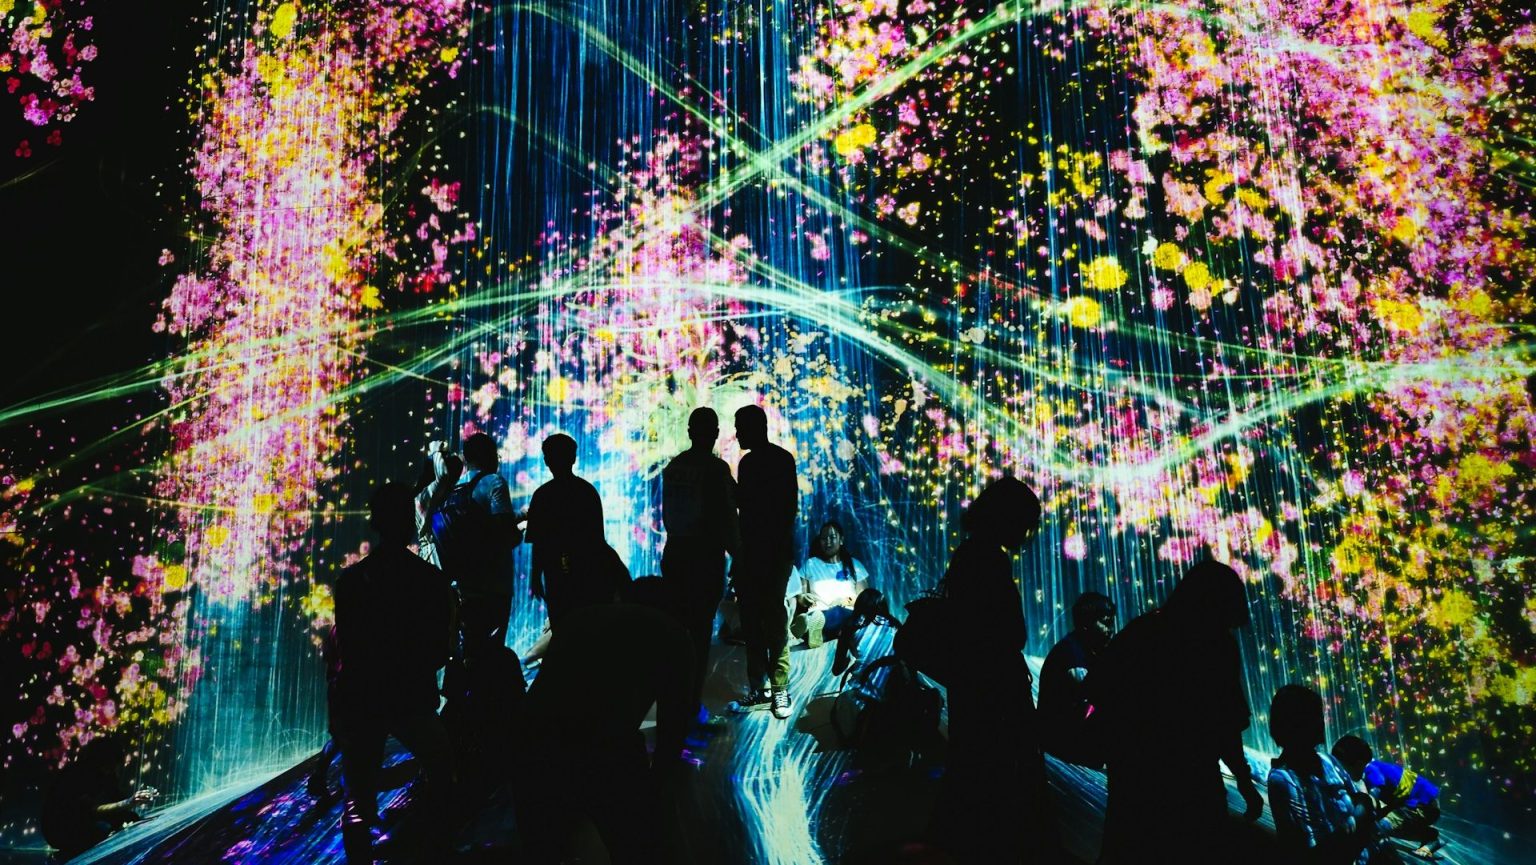 Silhouettes of posthumans immersed in a vibrant digital light display featuring floral patterns.